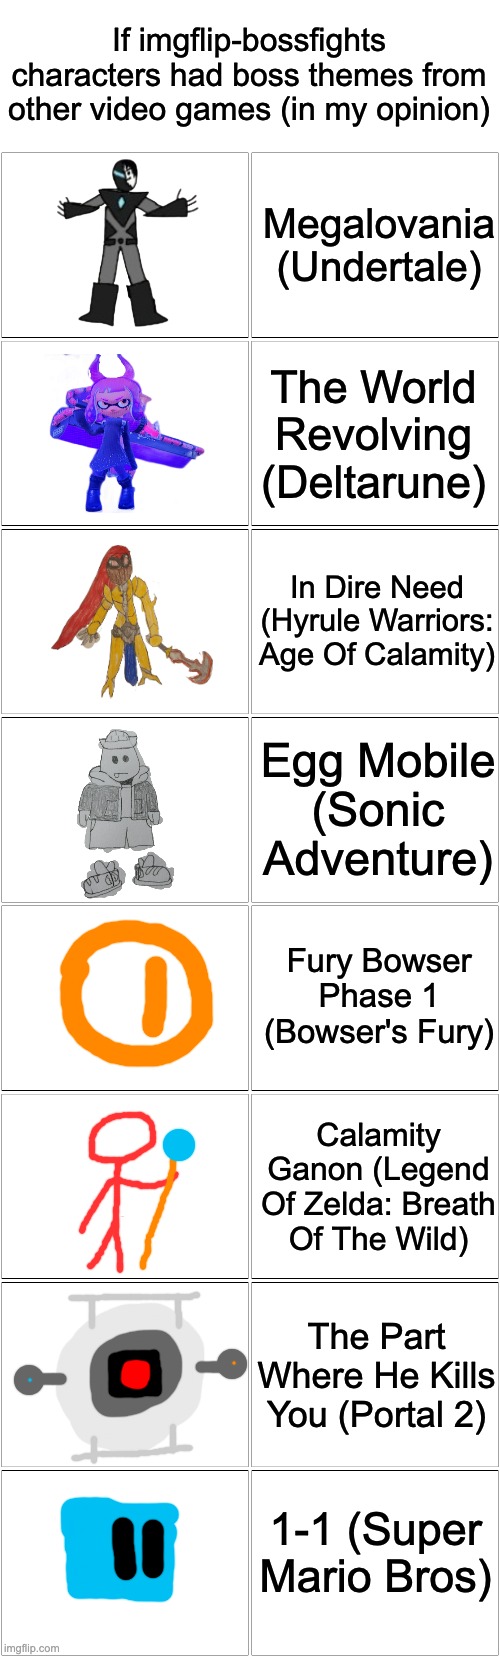 that last one is a joke lol | If imgflip-bossfights characters had boss themes from other video games (in my opinion); Megalovania (Undertale); The World Revolving (Deltarune); In Dire Need (Hyrule Warriors: Age Of Calamity); Egg Mobile (Sonic Adventure); Fury Bowser Phase 1 (Bowser's Fury); Calamity Ganon (Legend Of Zelda: Breath Of The Wild); The Part Where He Kills You (Portal 2); 1-1 (Super Mario Bros) | image tagged in blank comic panel 2x8 | made w/ Imgflip meme maker